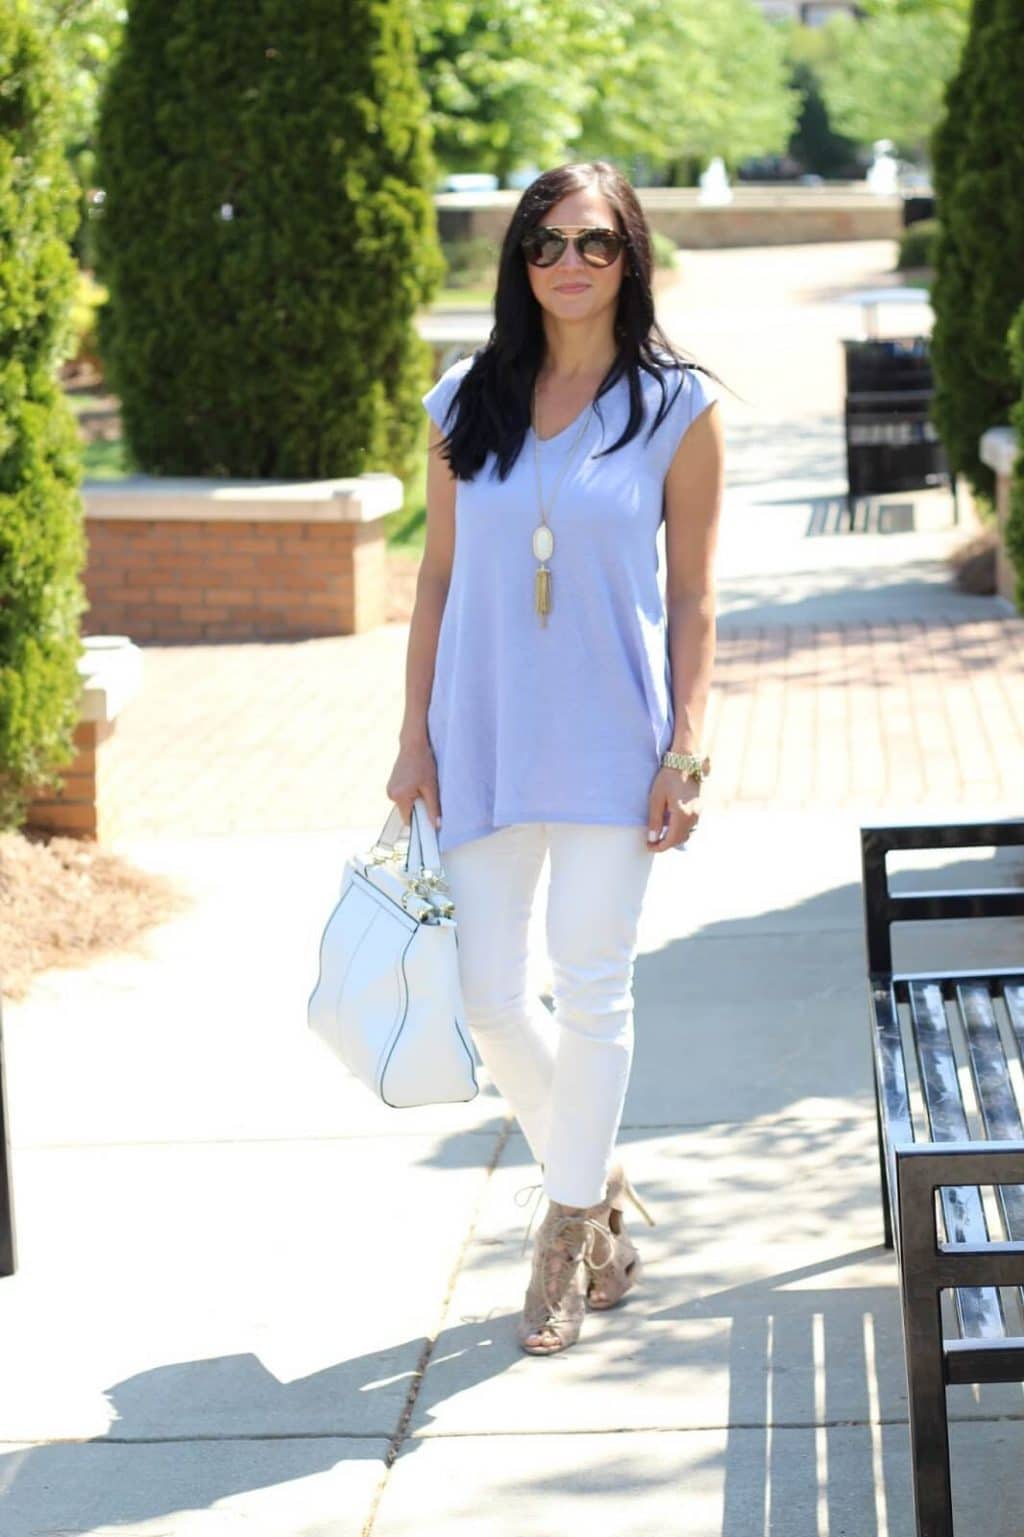 J. Jill Spring Style, White Skinny, lace up bootie, lavender tunic